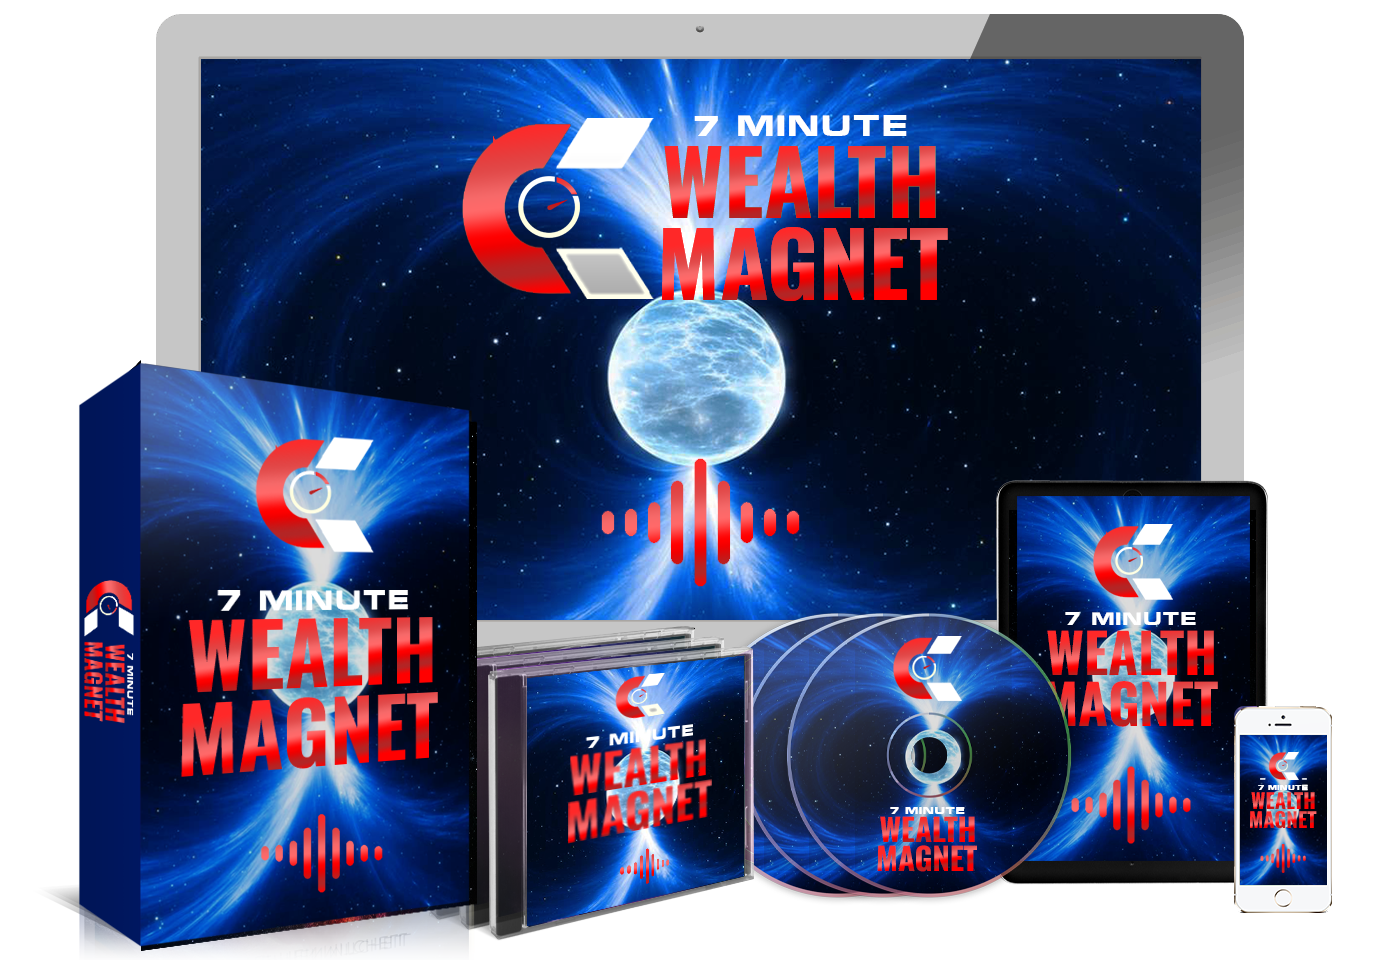 7-Minute Wealth Magnet Reviews